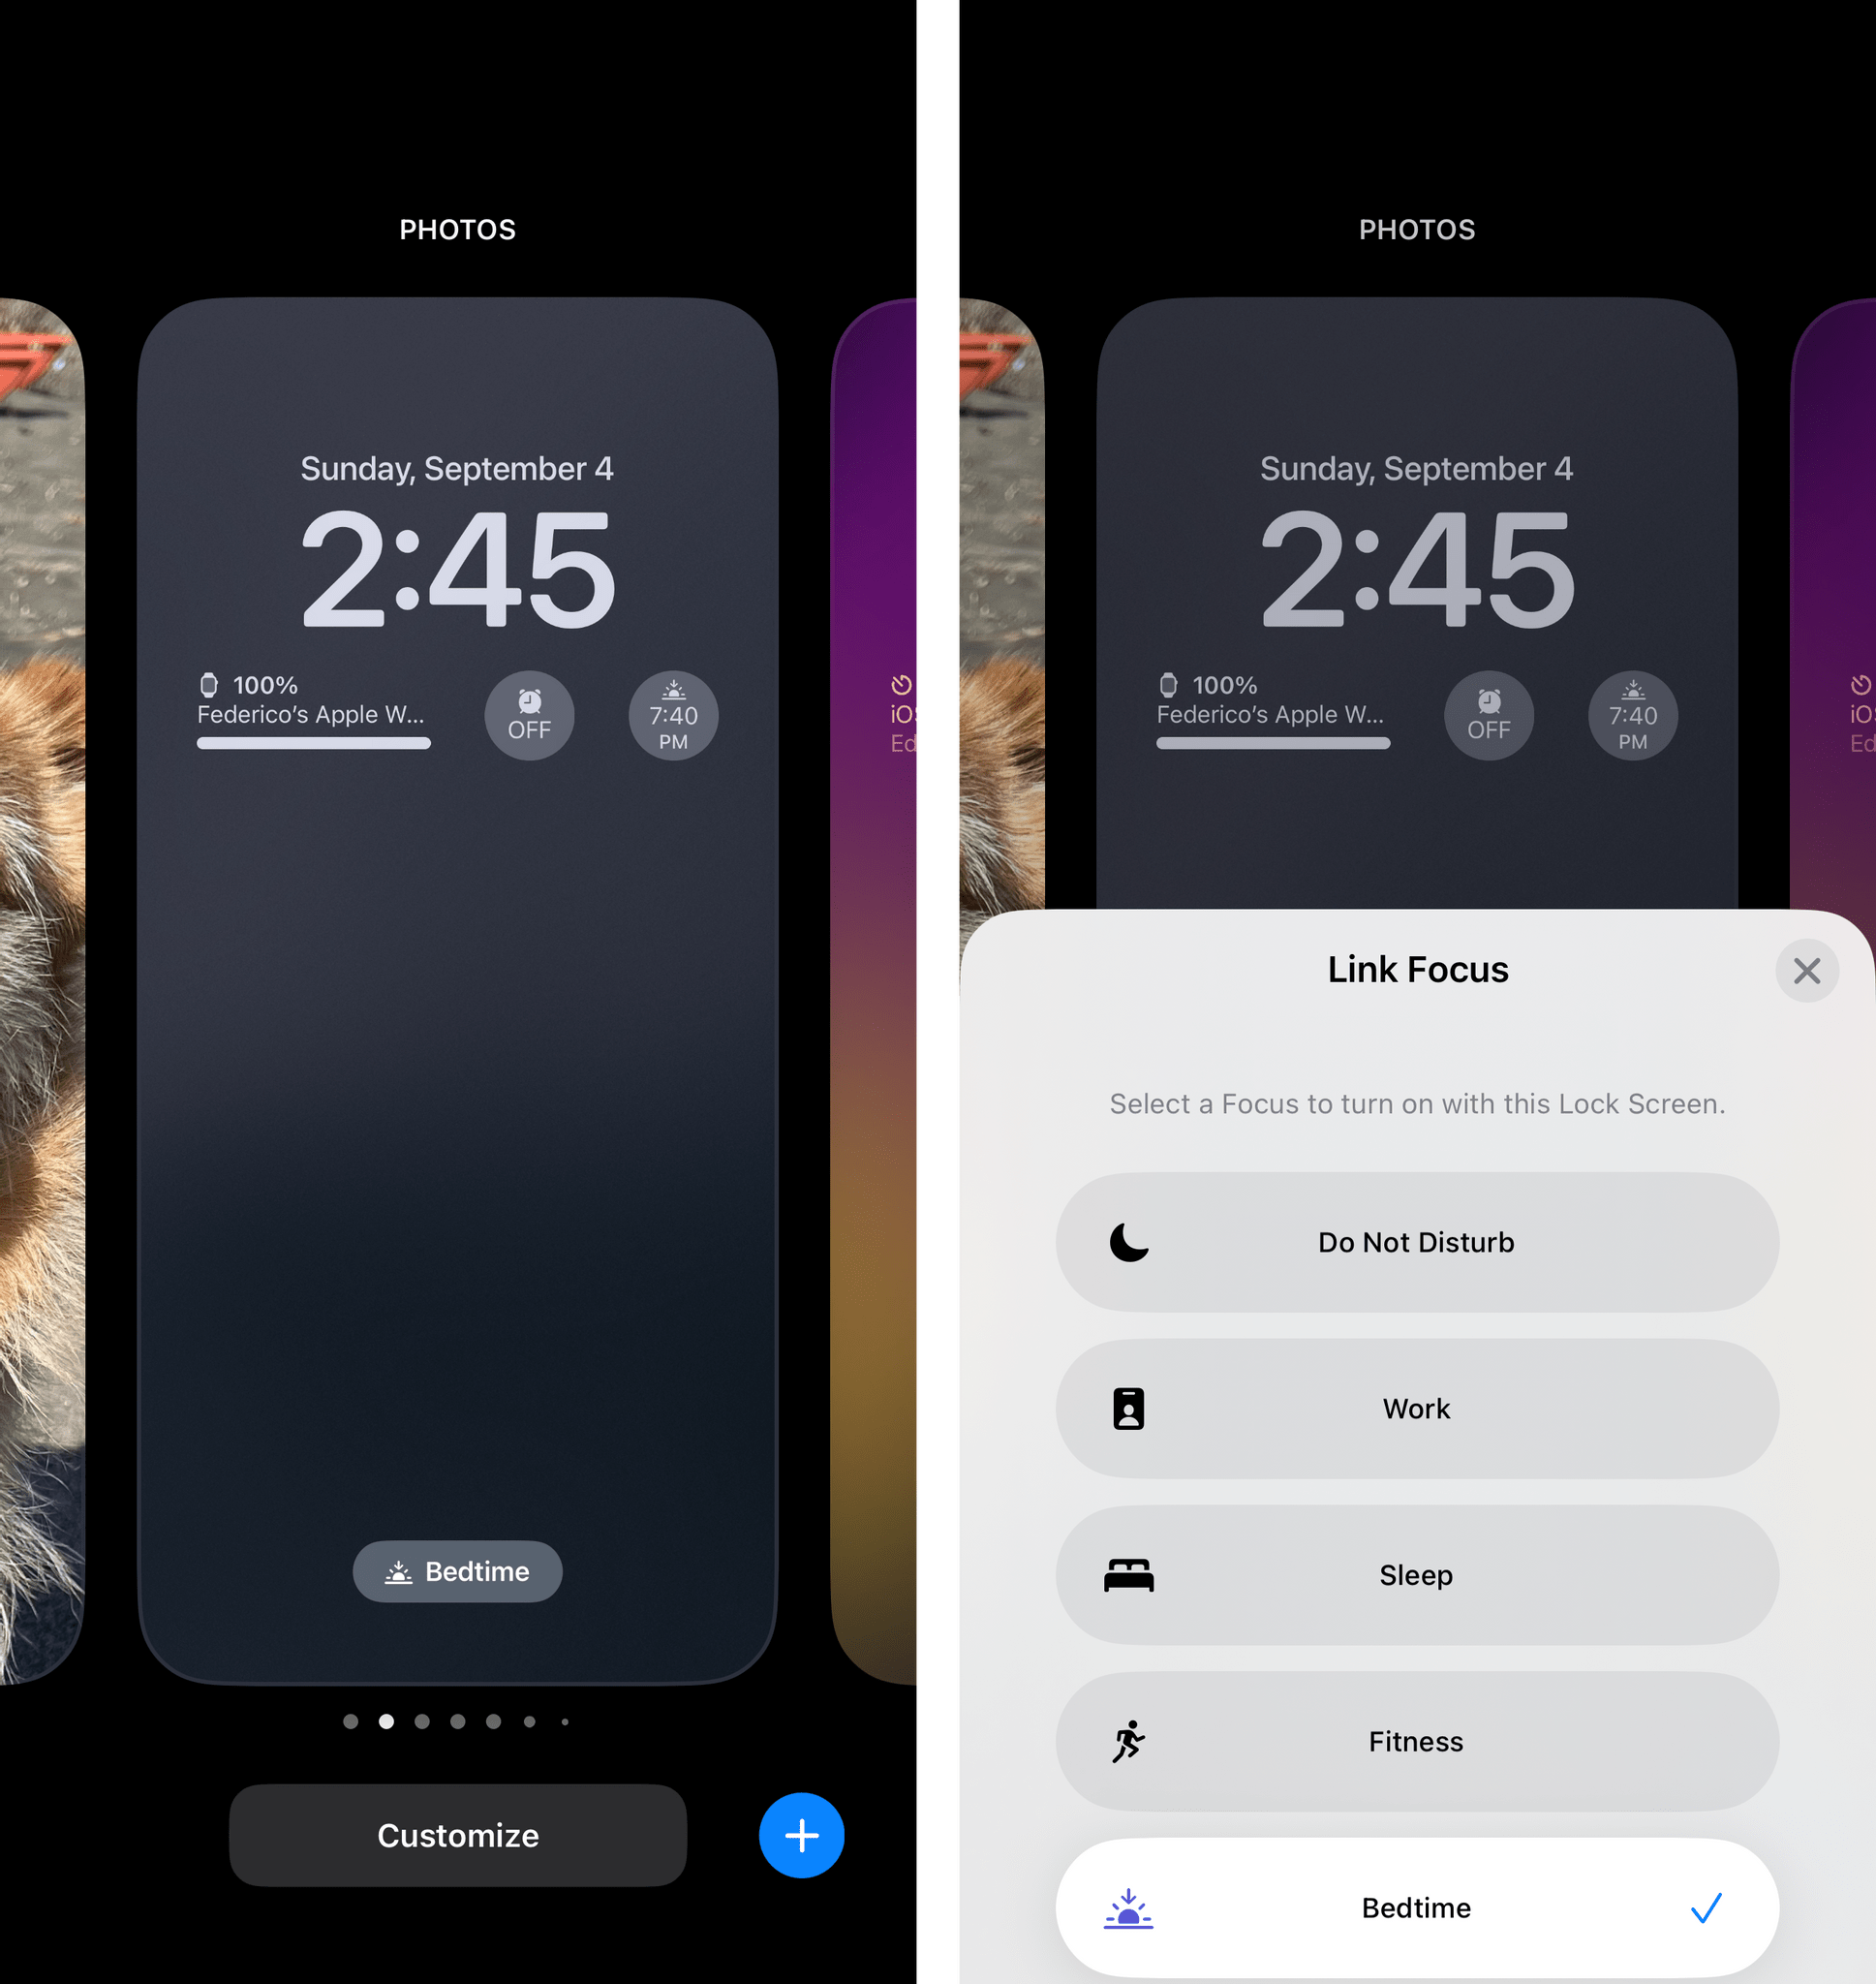 Linking a Lock Screen to a Focus mode.